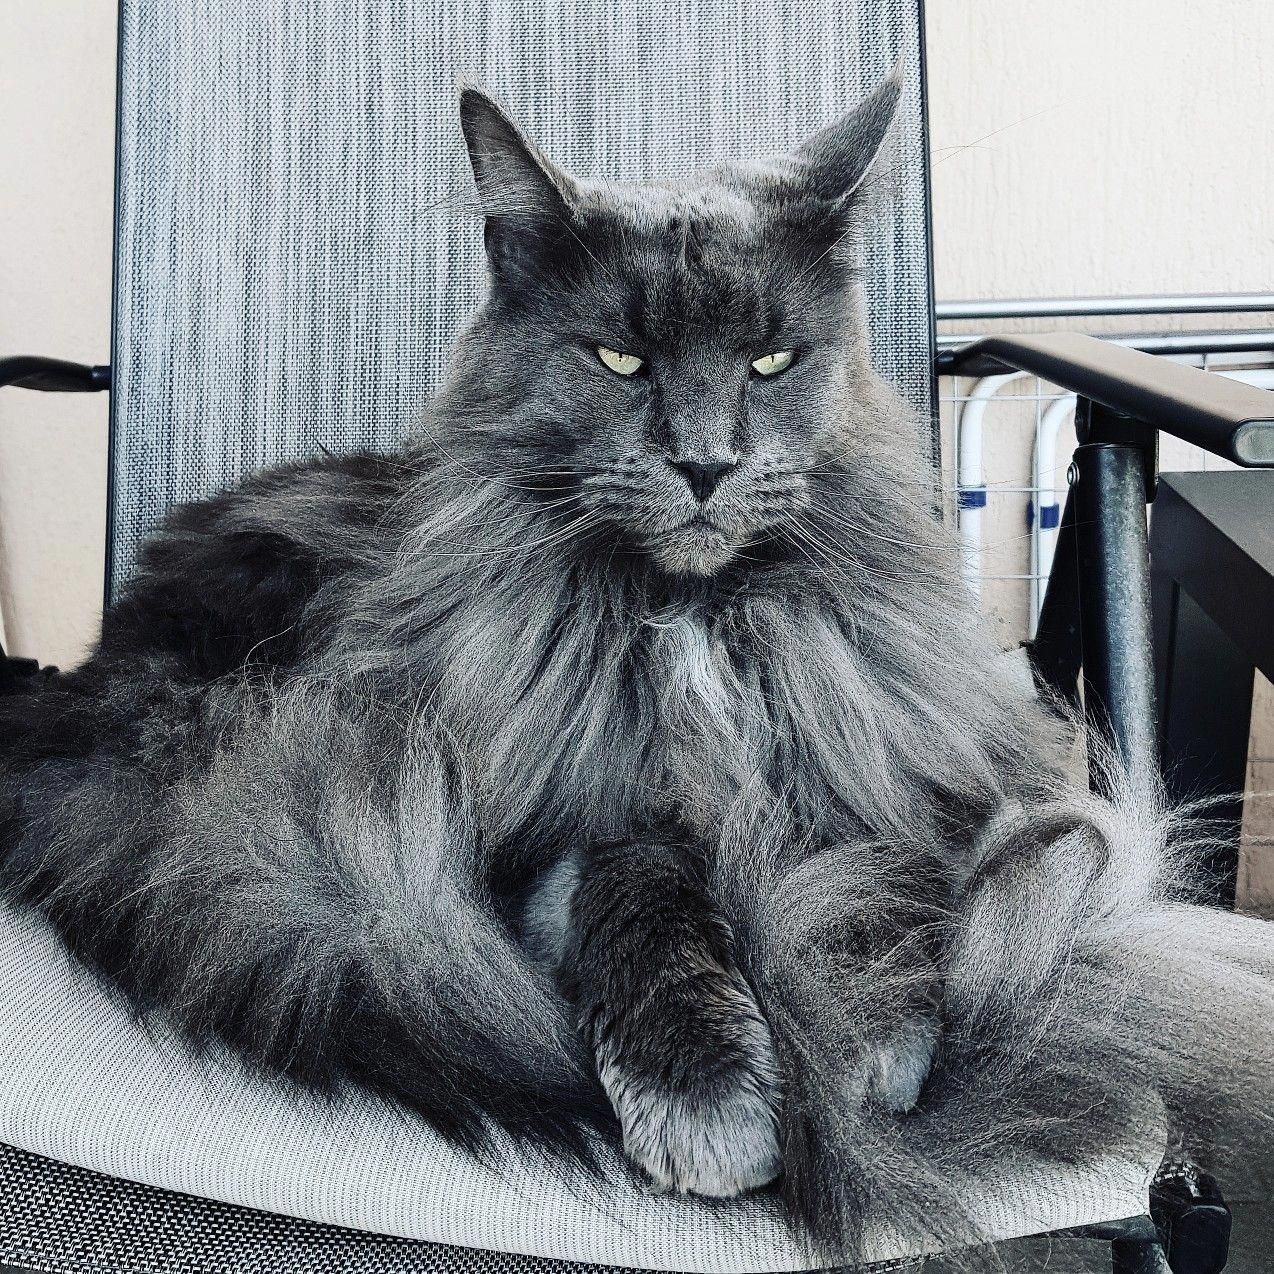 Maine coon cat coons majestic beauty beasts mythical captures photographer